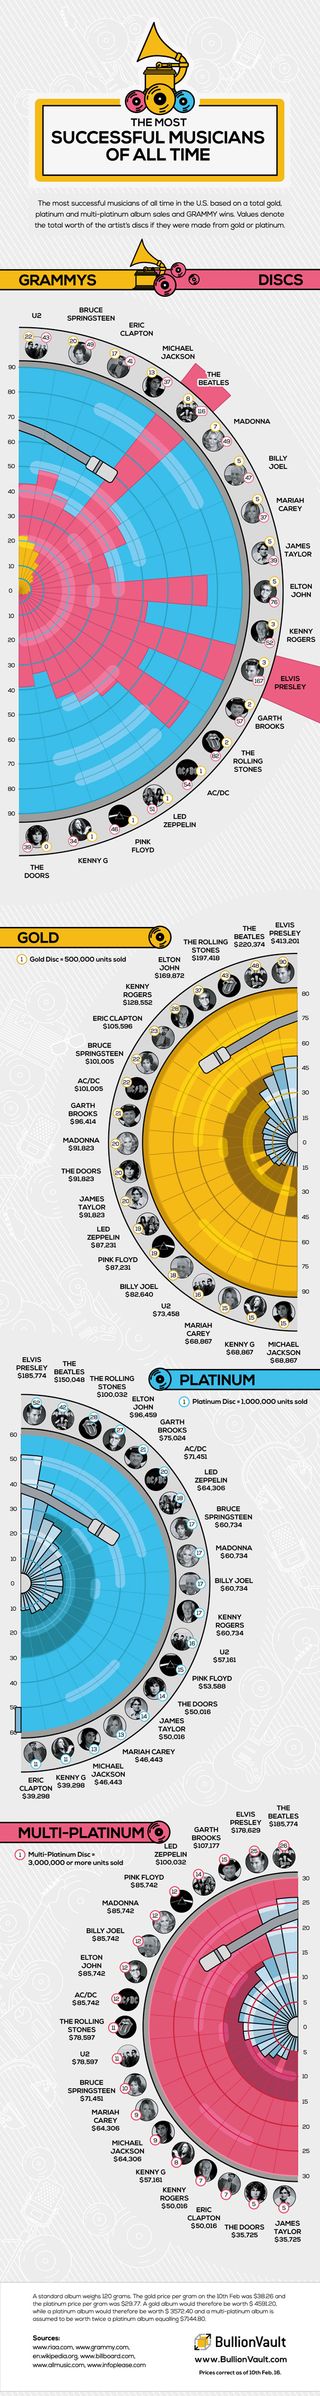 Infographic: Most successful musicians